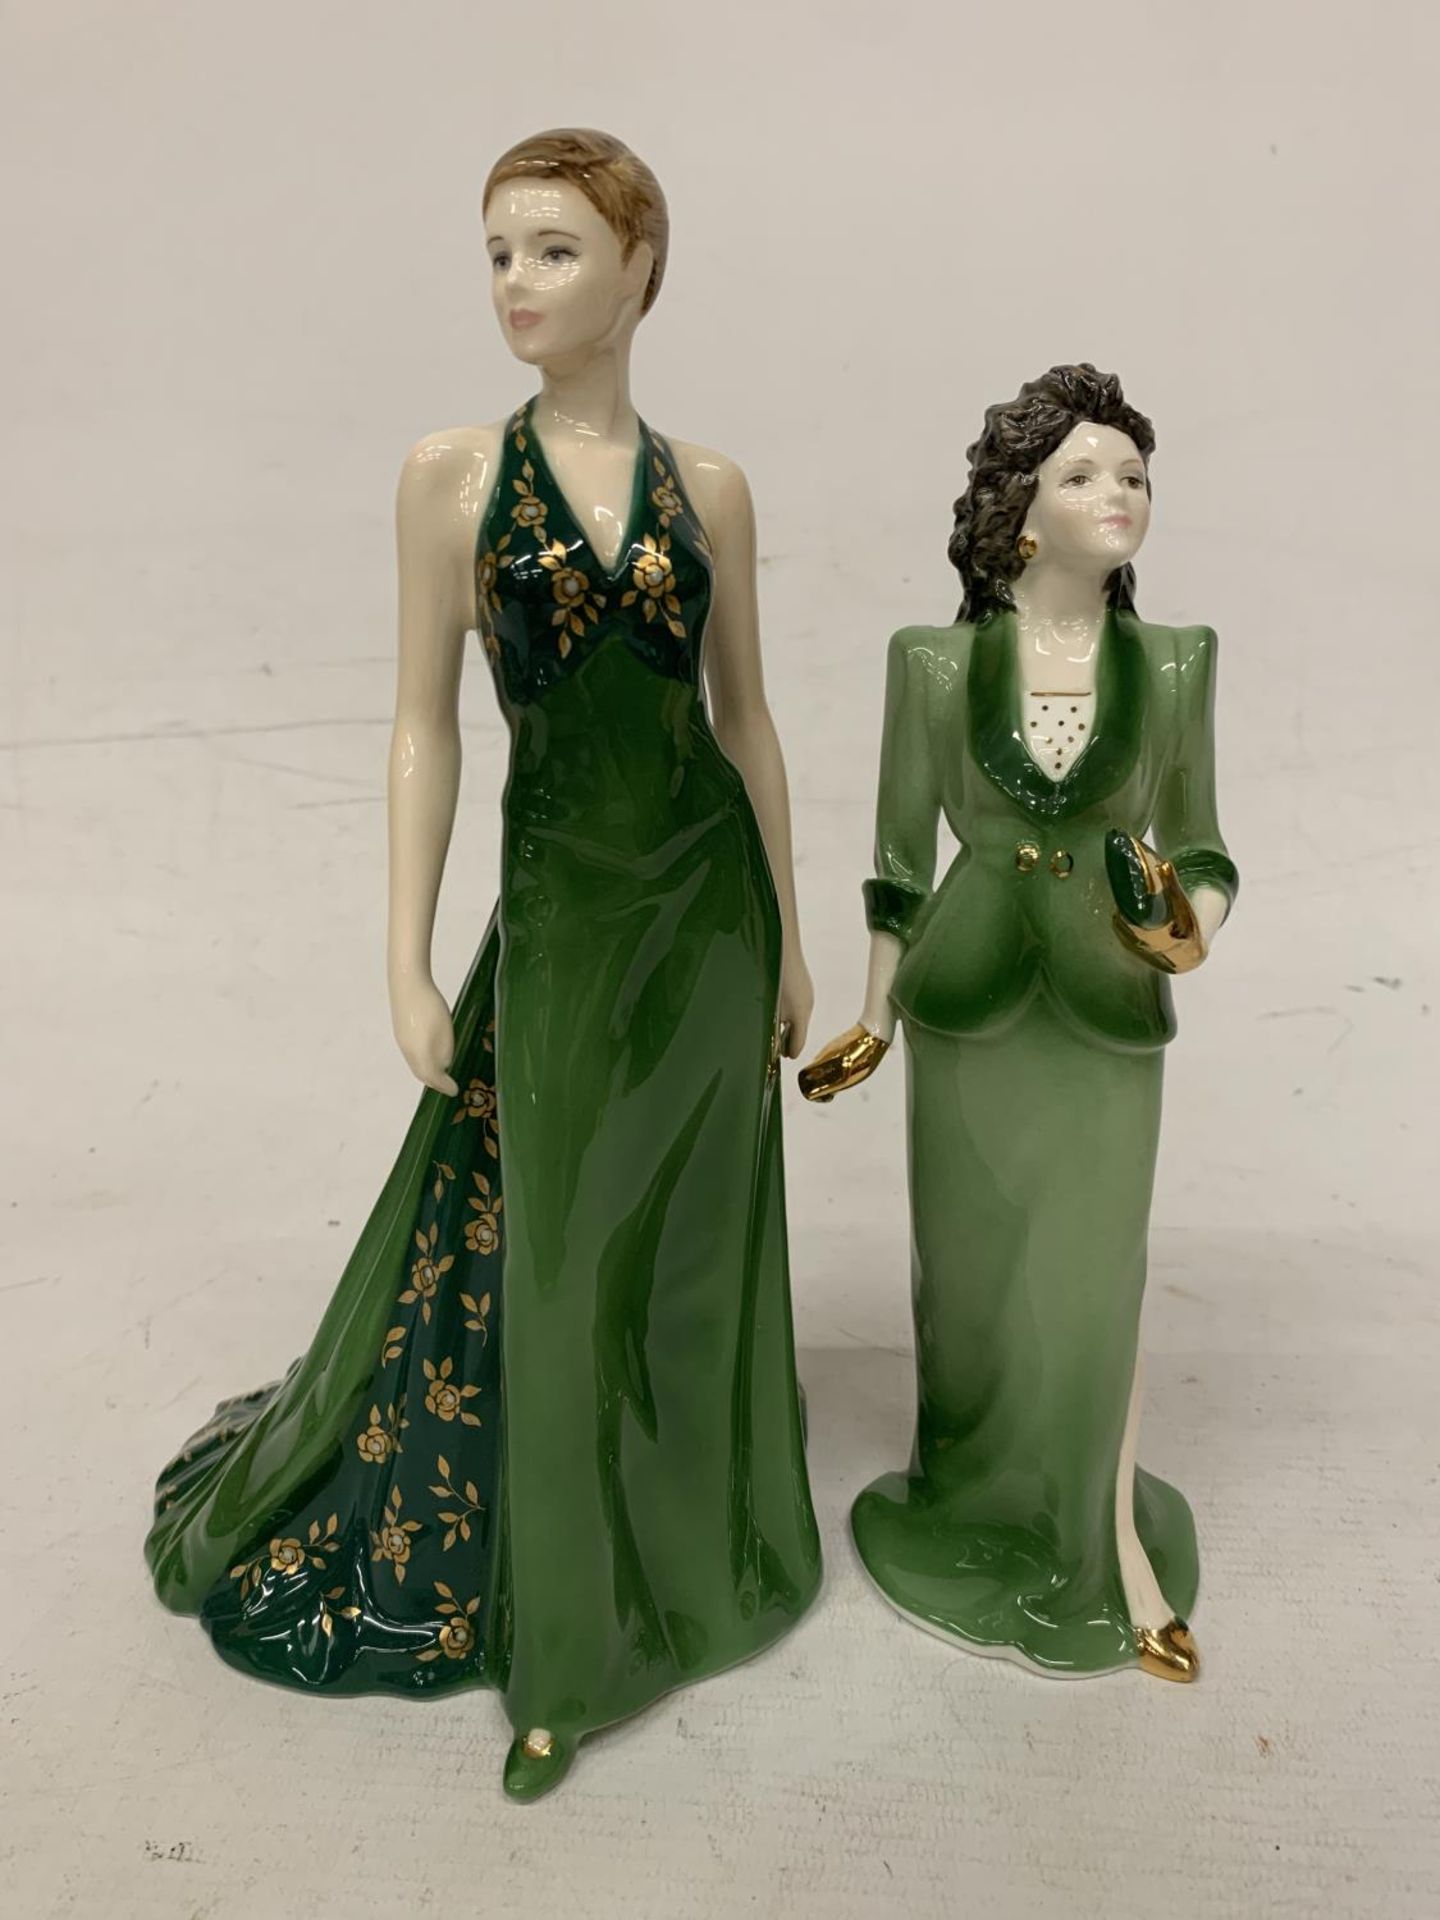 TWO COALPORT FIGURINES "VIVIEN" FROM THE WESTEND GIRLS COLLECTION (1992) AND "SAMANTHA" FIGURE OF